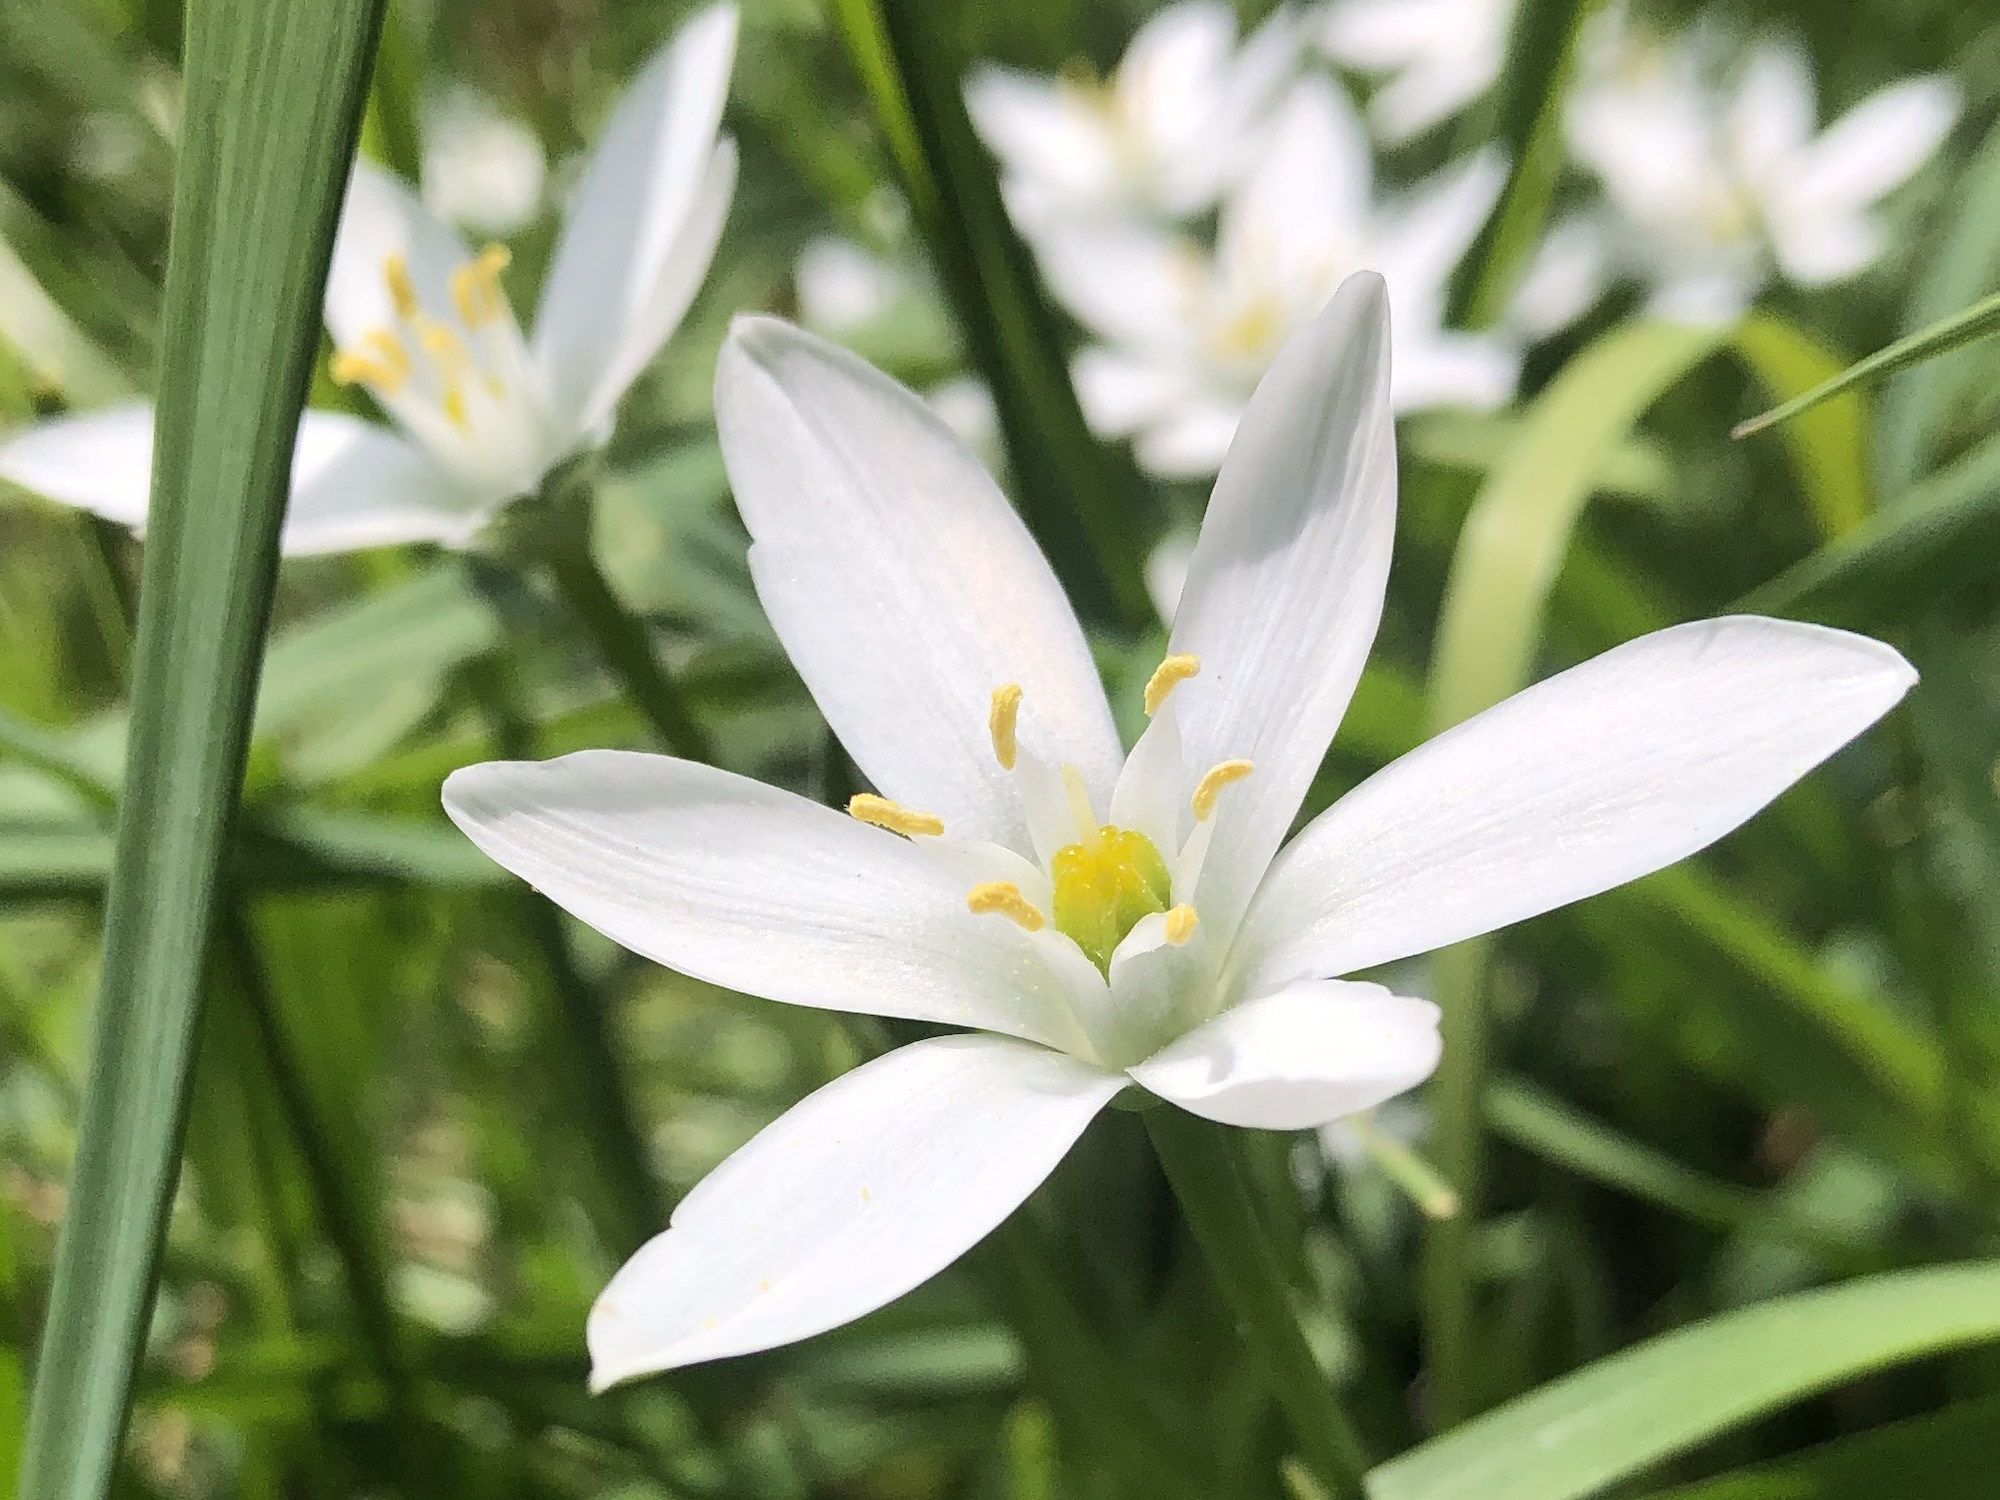 Star-of-Bethlehem along bike path behind Gregory Street in Madison, Wisconsin on May 23, 2022.